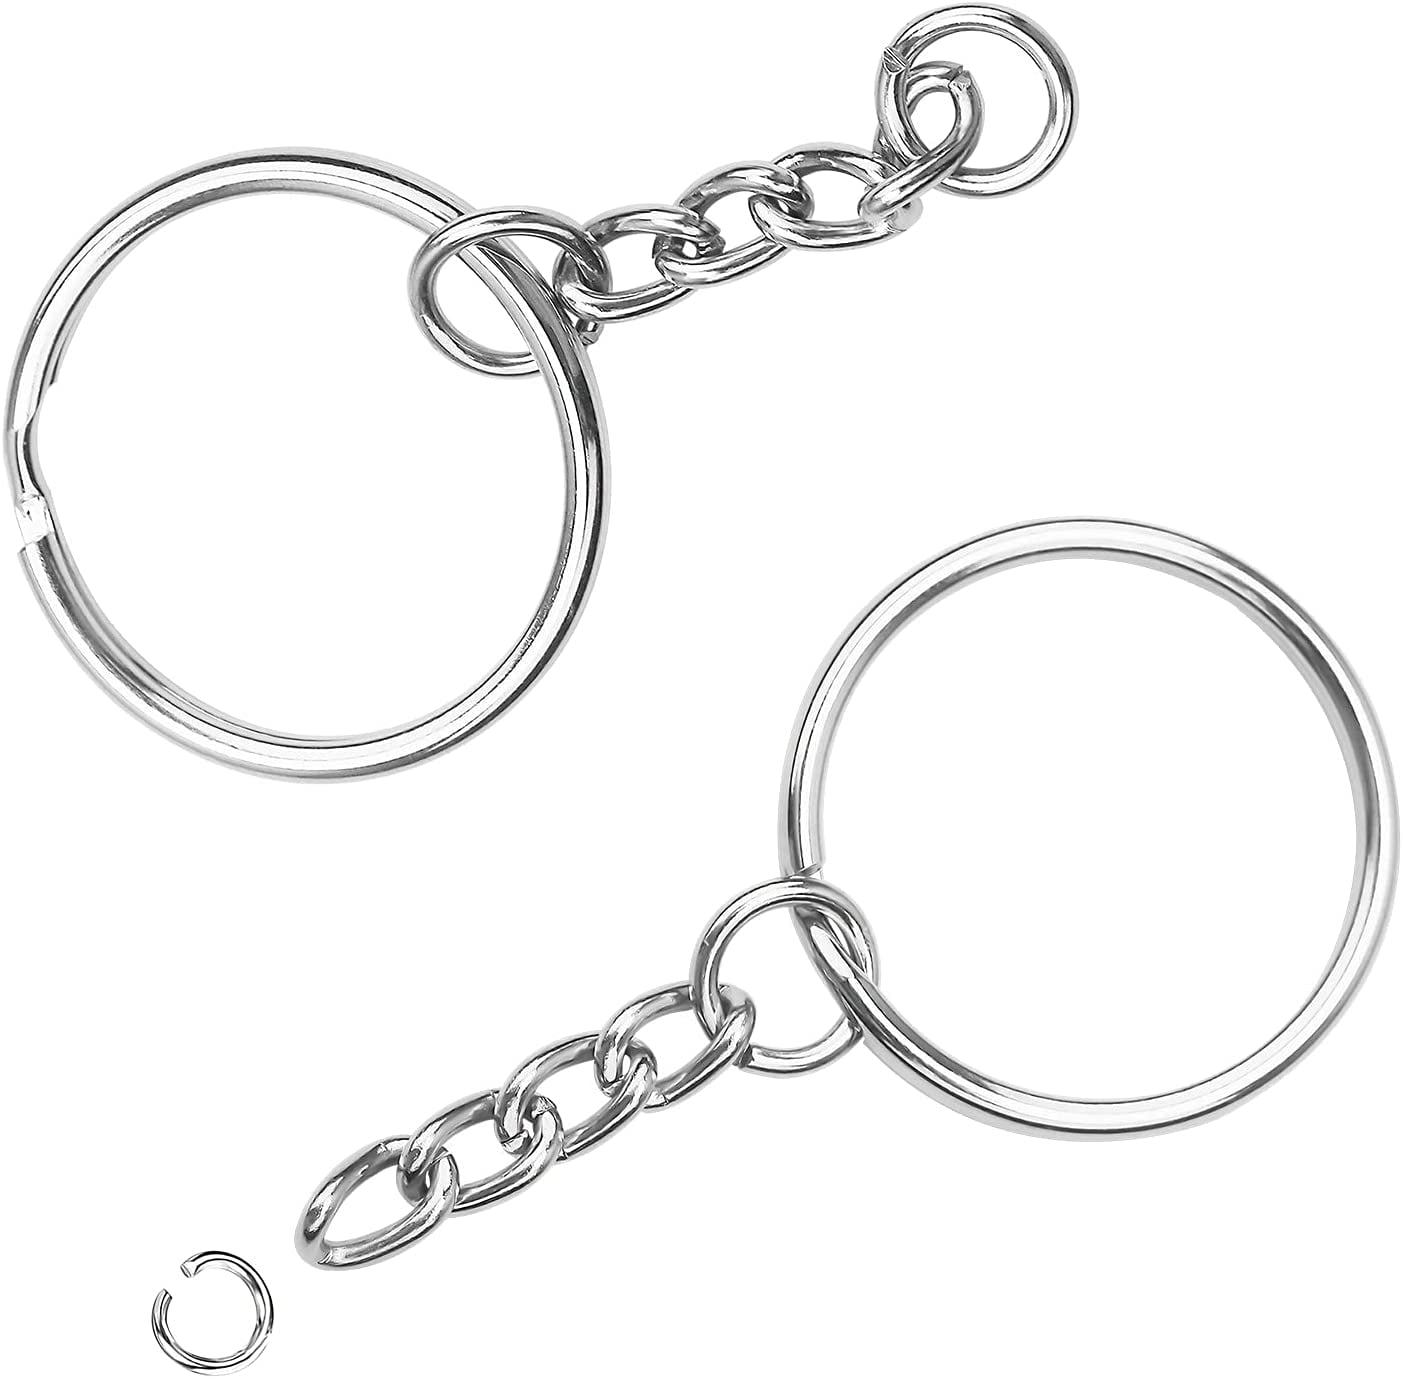 100pcs Keychain Rings with Chain and Jump Rings, 1 inch Split Key Ring with  Chain Heavy-Duty Keychain Rings Bulk for Craft Making Jewelry Making  Keyrings Kit 